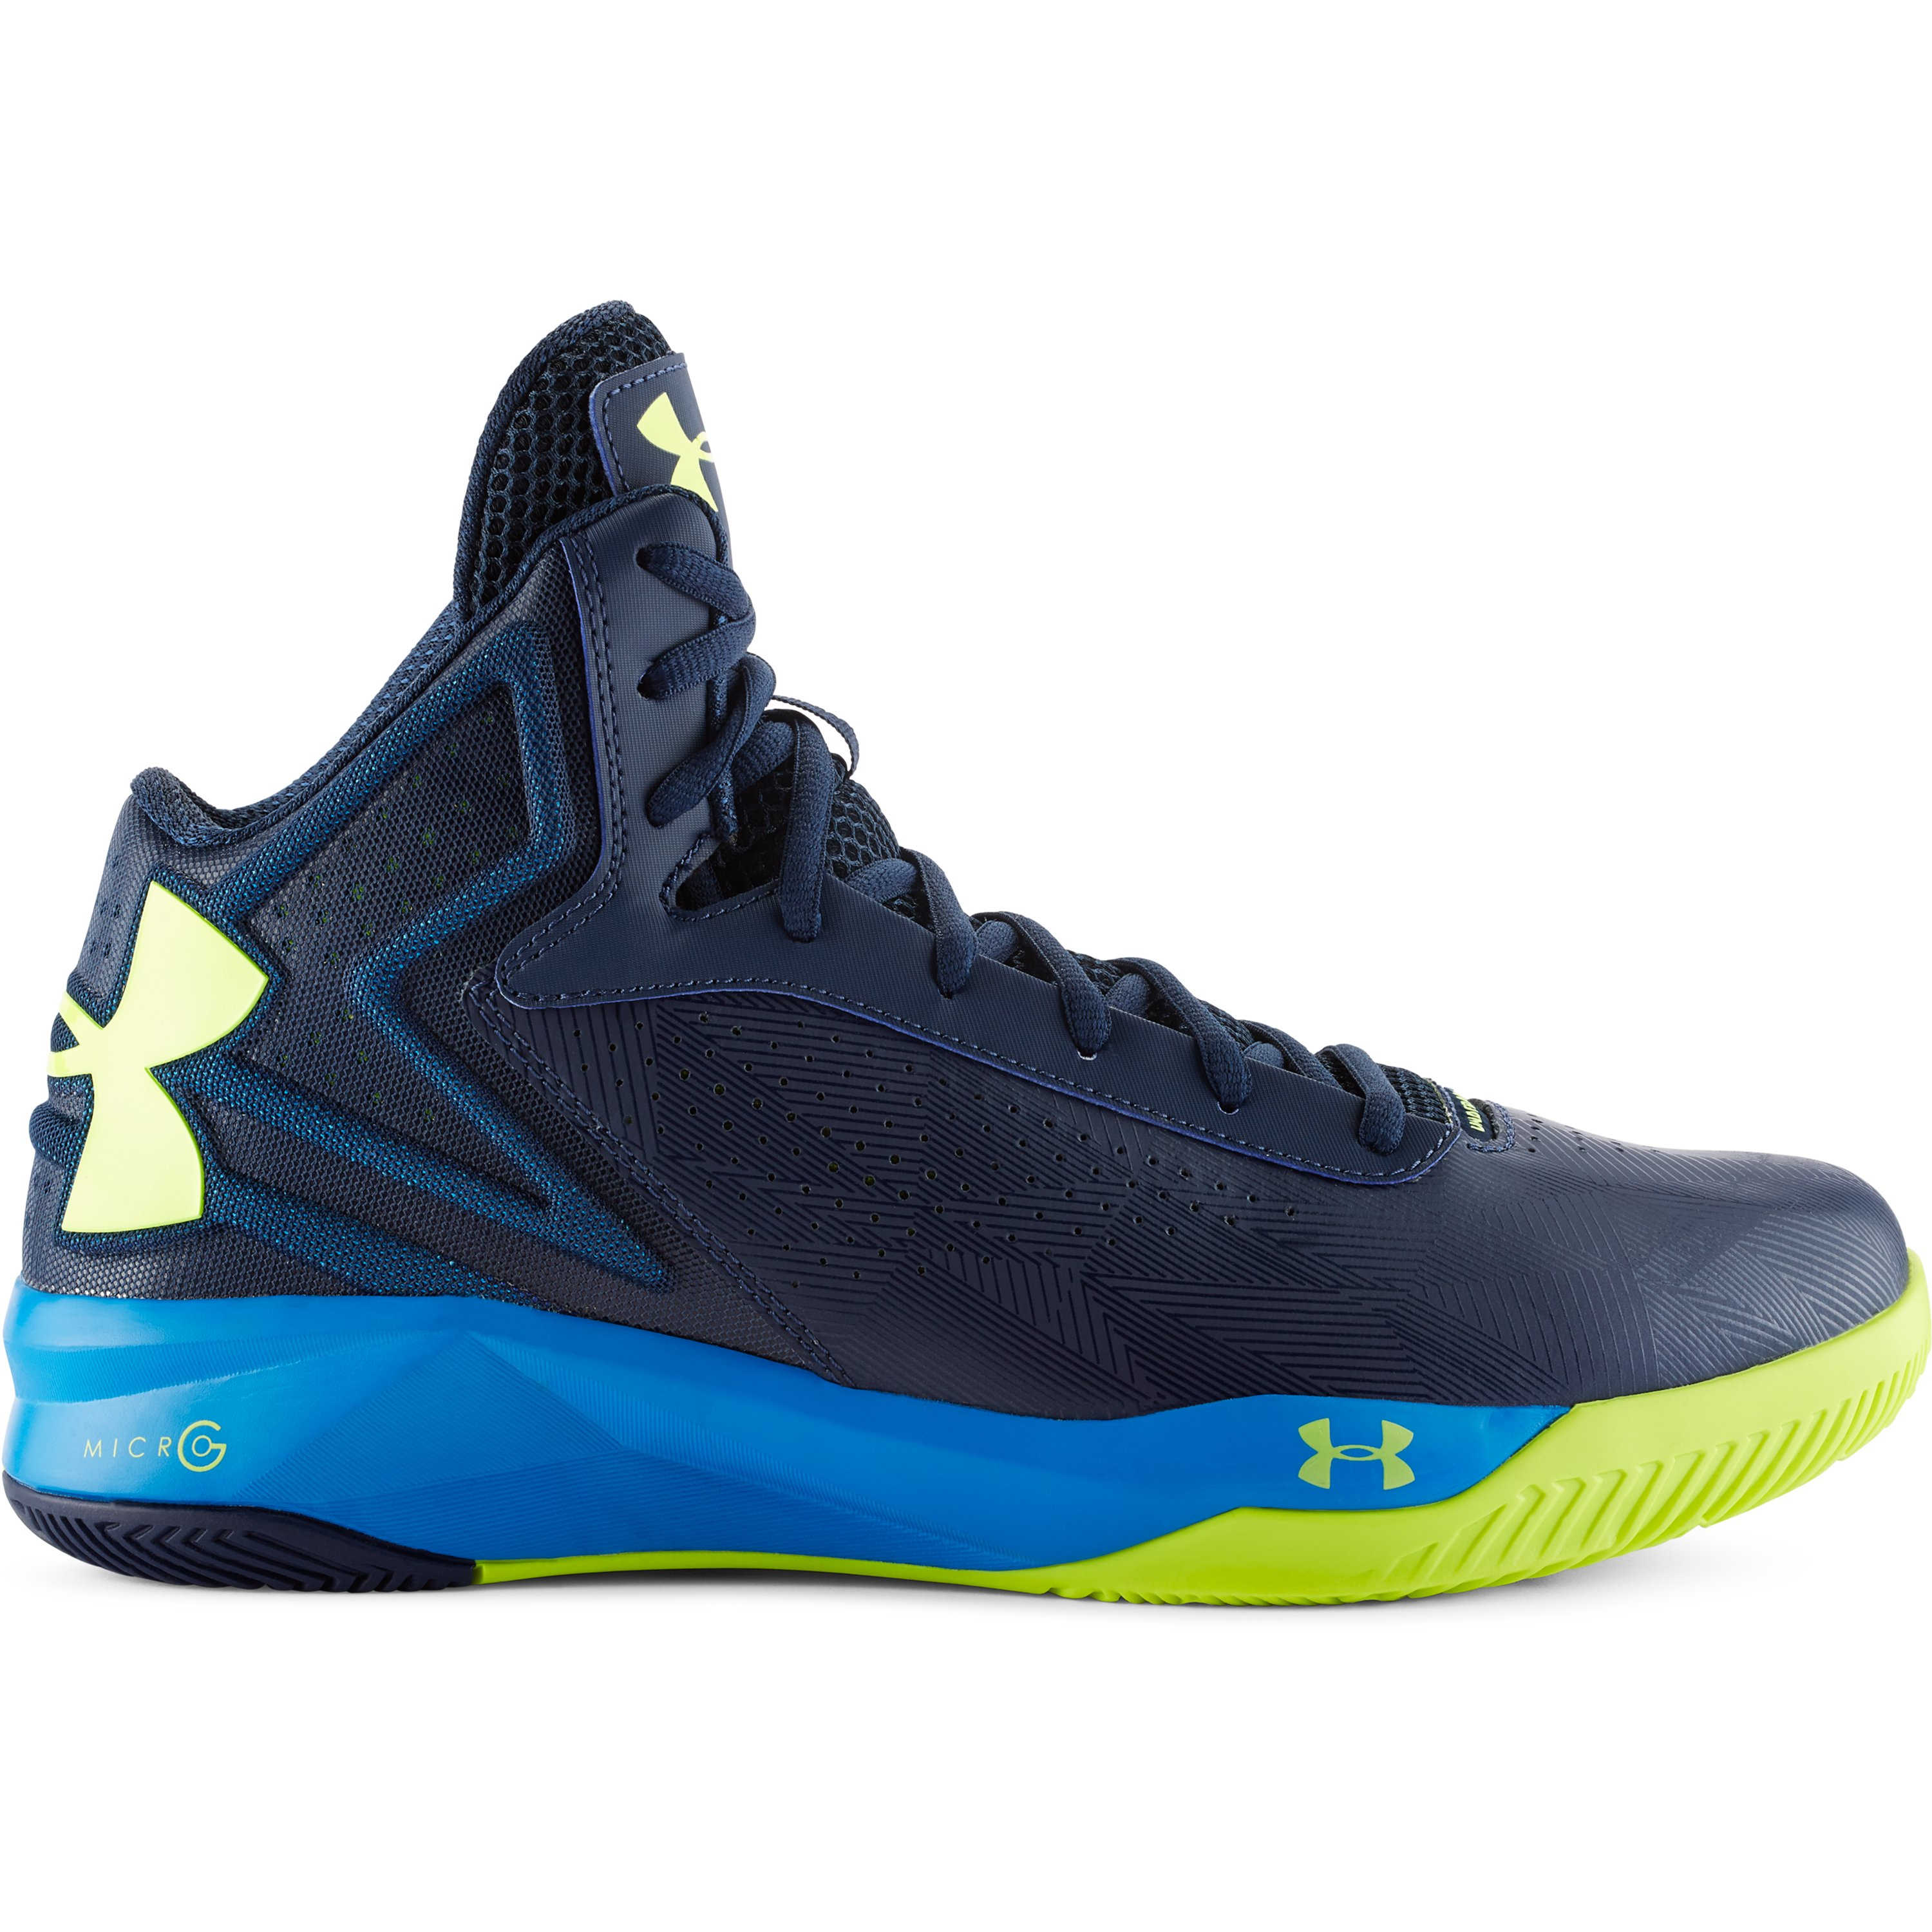 Lyst - Under Armour Men's Ua Micro GÂ® Torch Basketball Shoes in Blue for Men